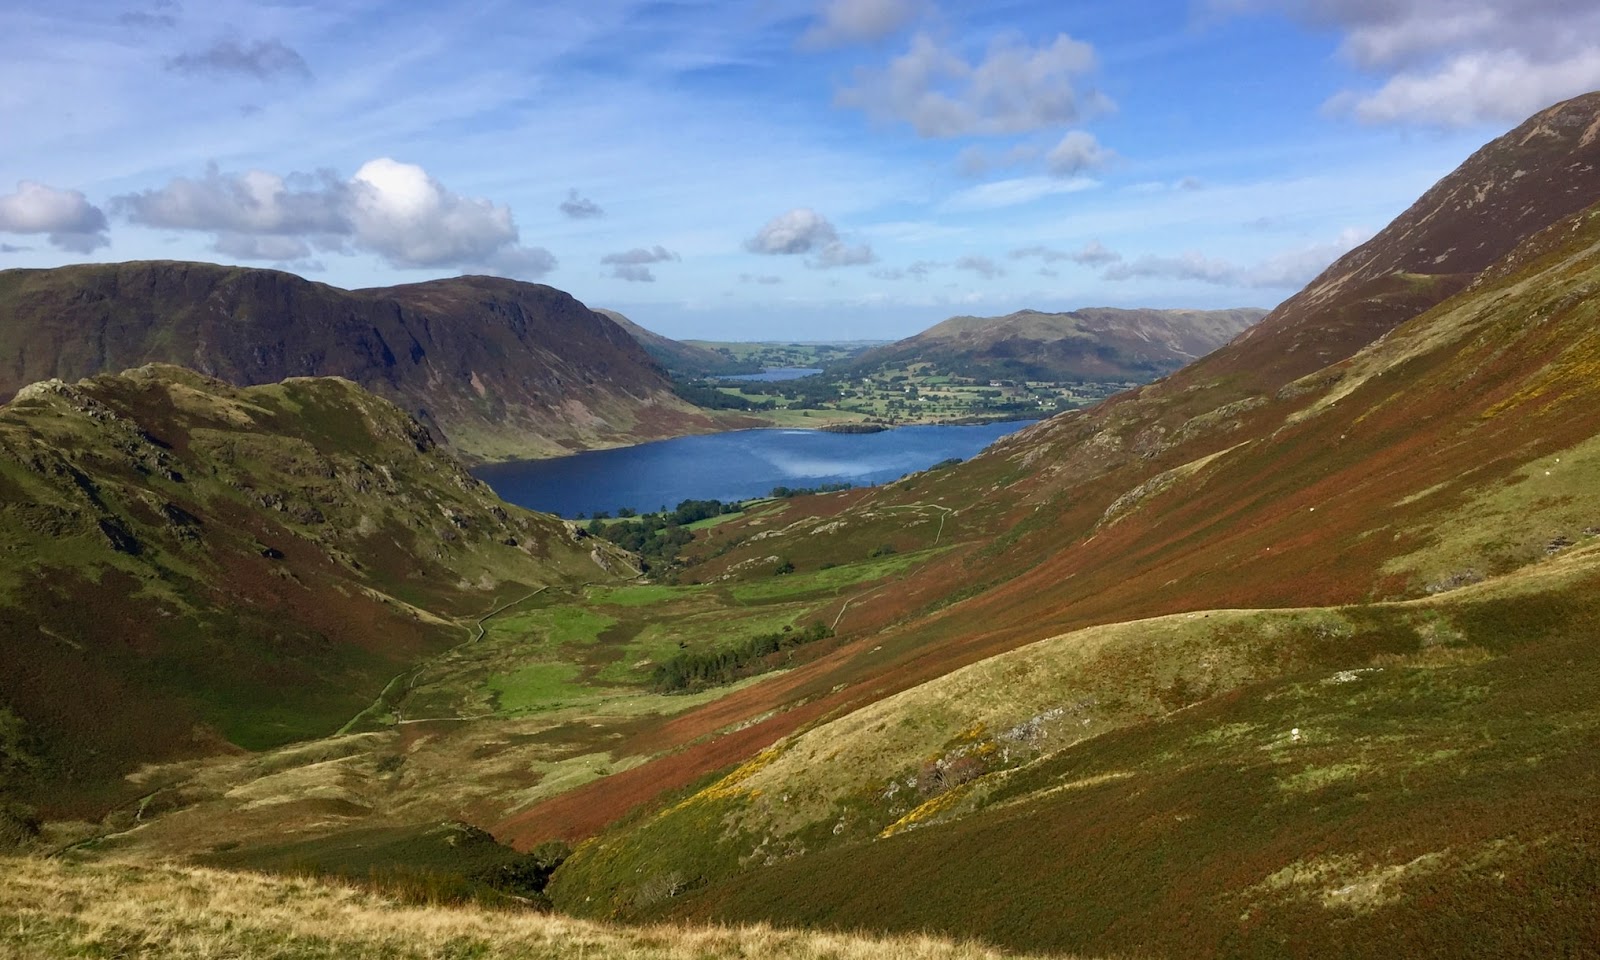 The Lake District is a great staycation destination in the UK